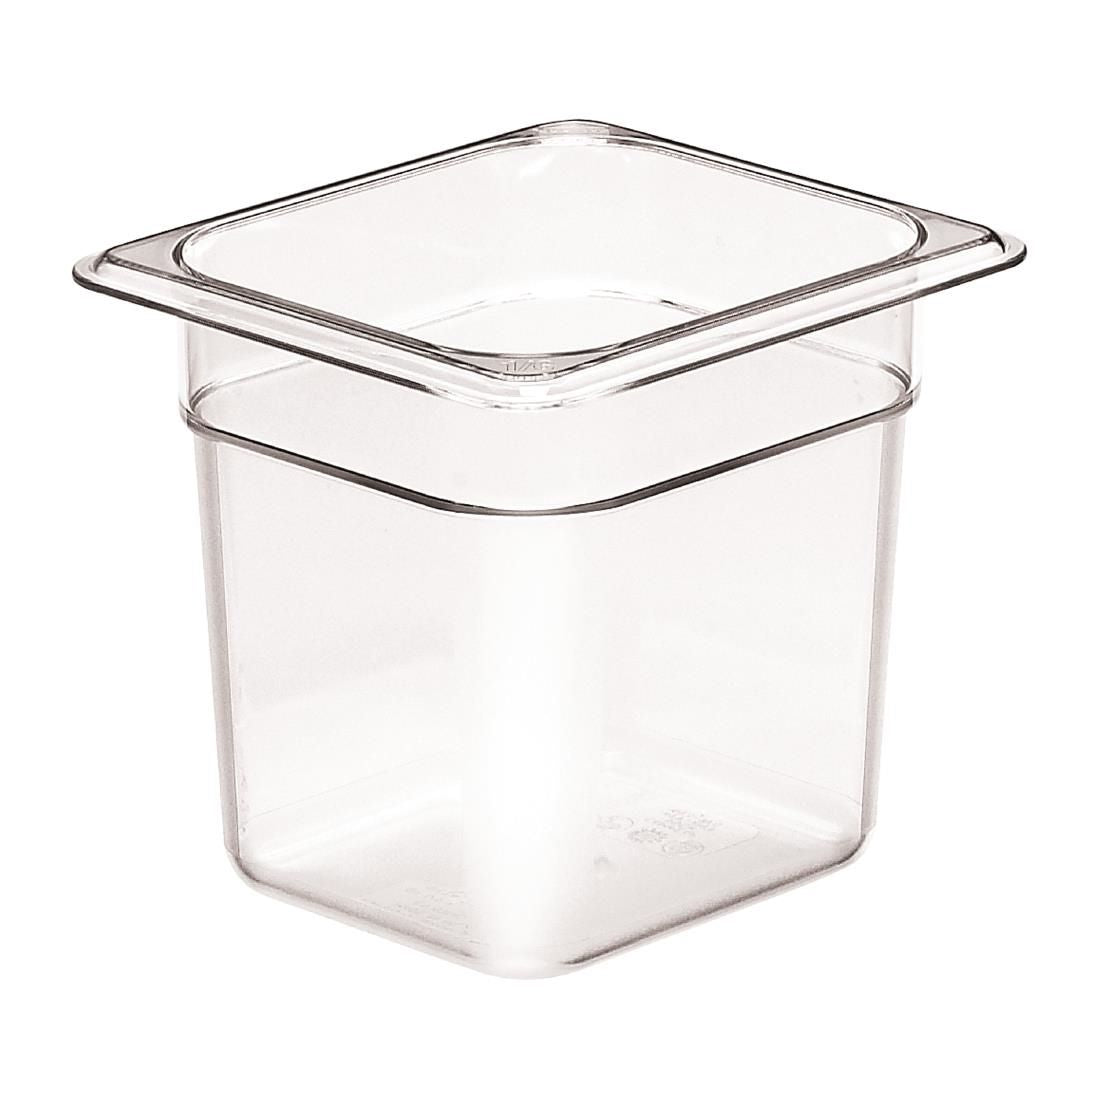 DM753 Cambro Polycarbonate 1/6 Gastronorm Pan 150mm JD Catering Equipment Solutions Ltd